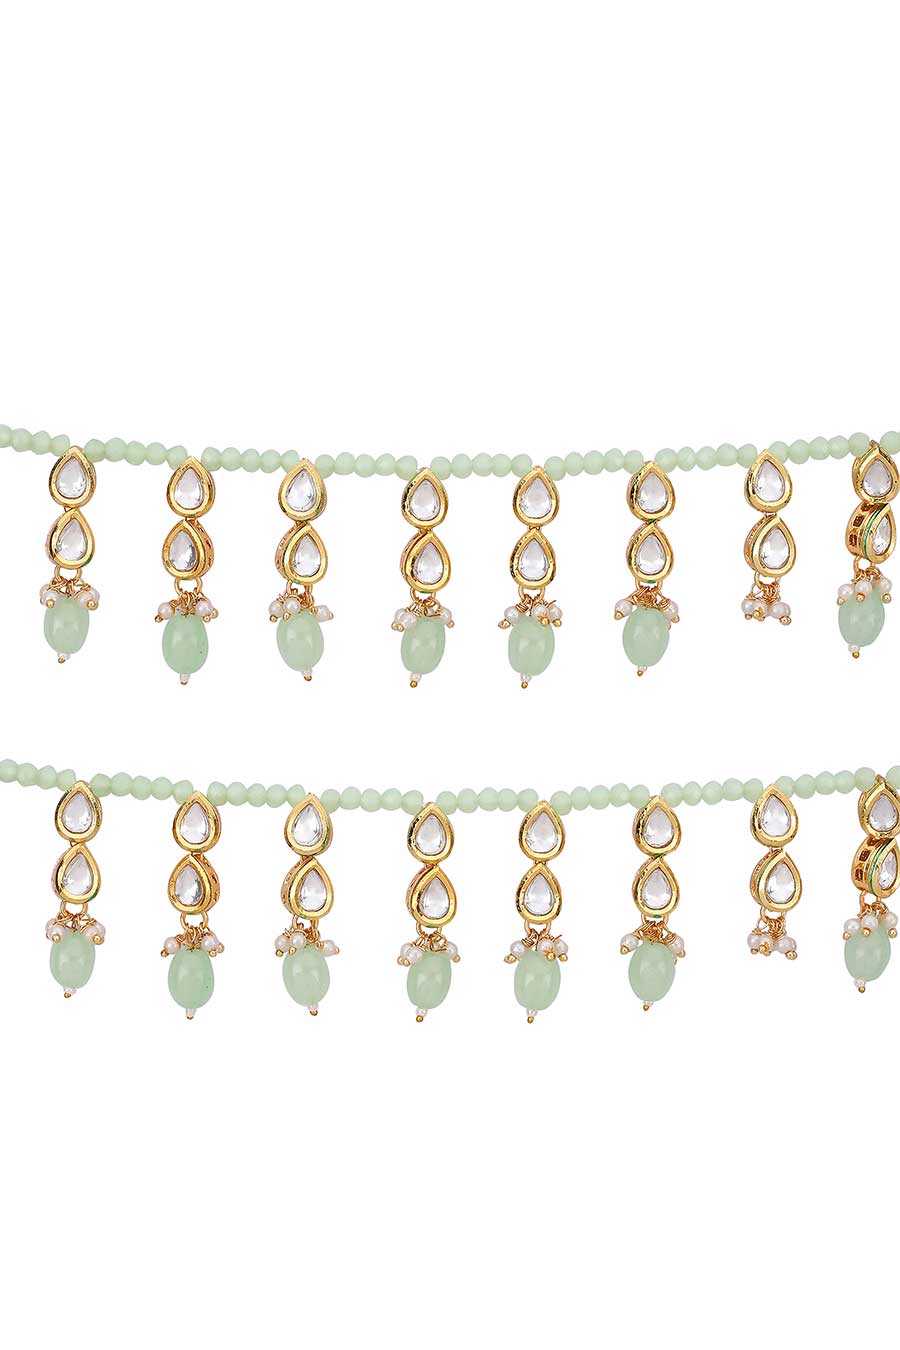 Gold Plated Kundan Stone & Beaded Anklets (Set of 2)